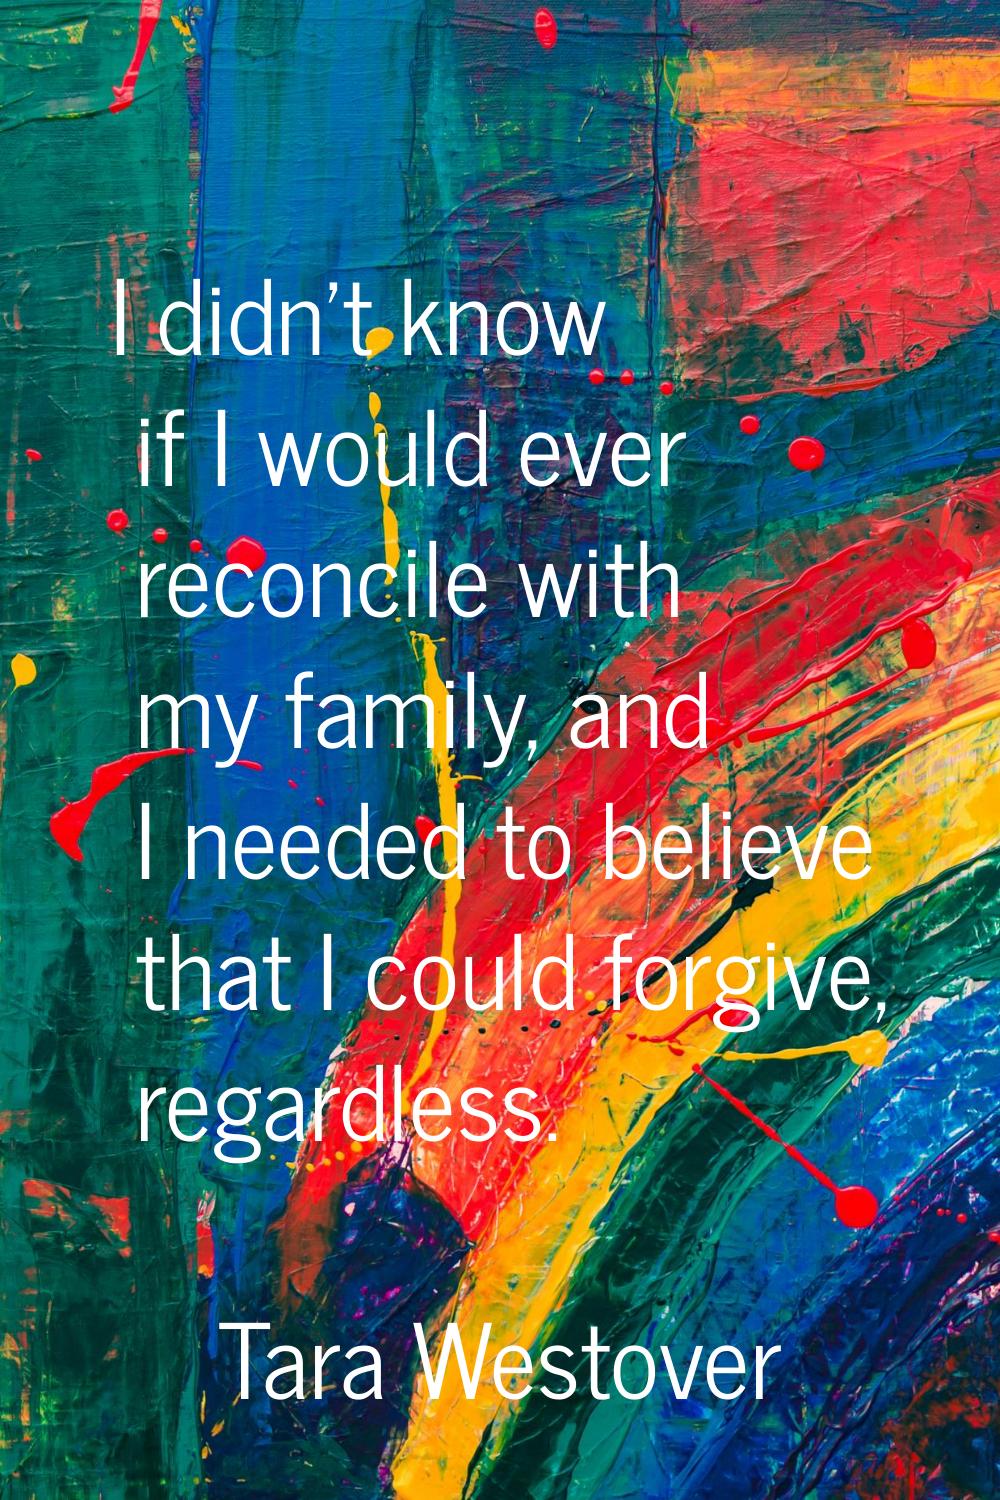 I didn't know if I would ever reconcile with my family, and I needed to believe that I could forgiv